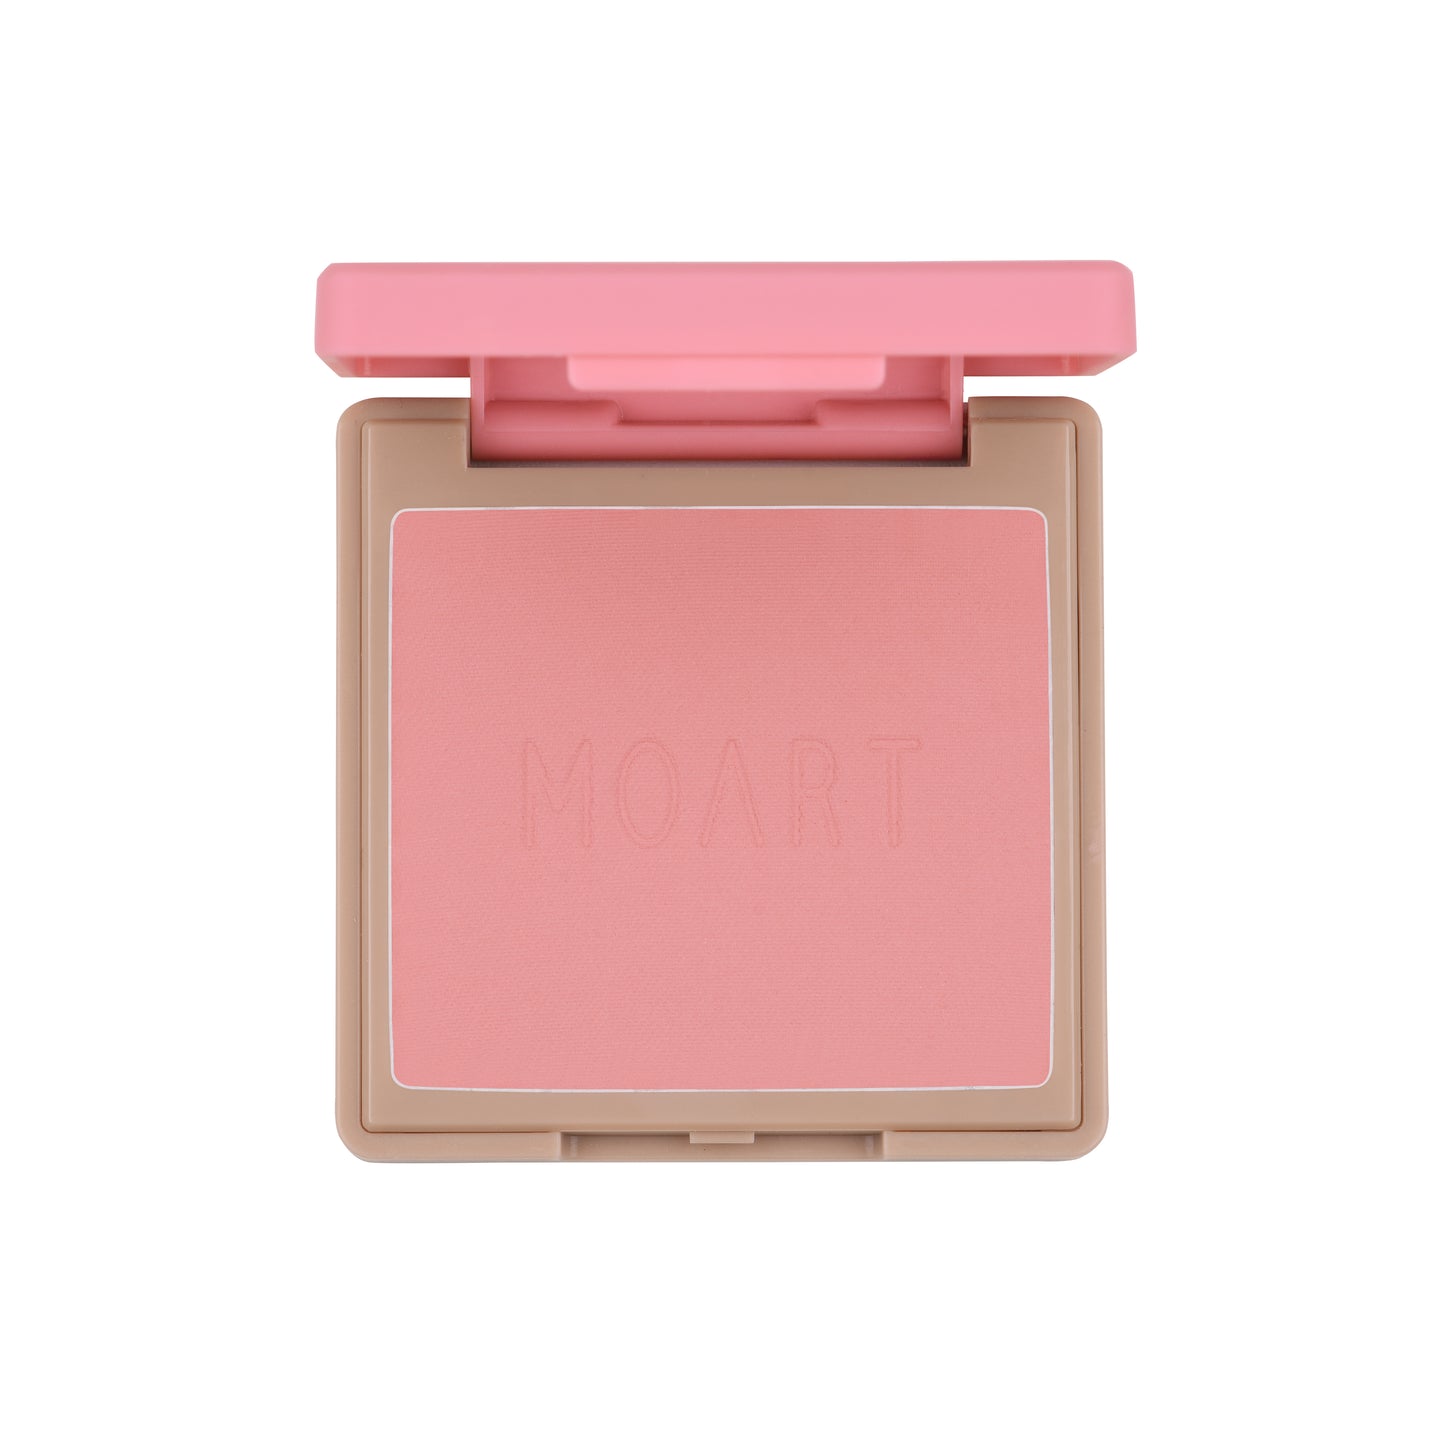 Load image into Gallery viewer, Moart Velvet Blusher F4 Full of Rosy Pink, 9g
